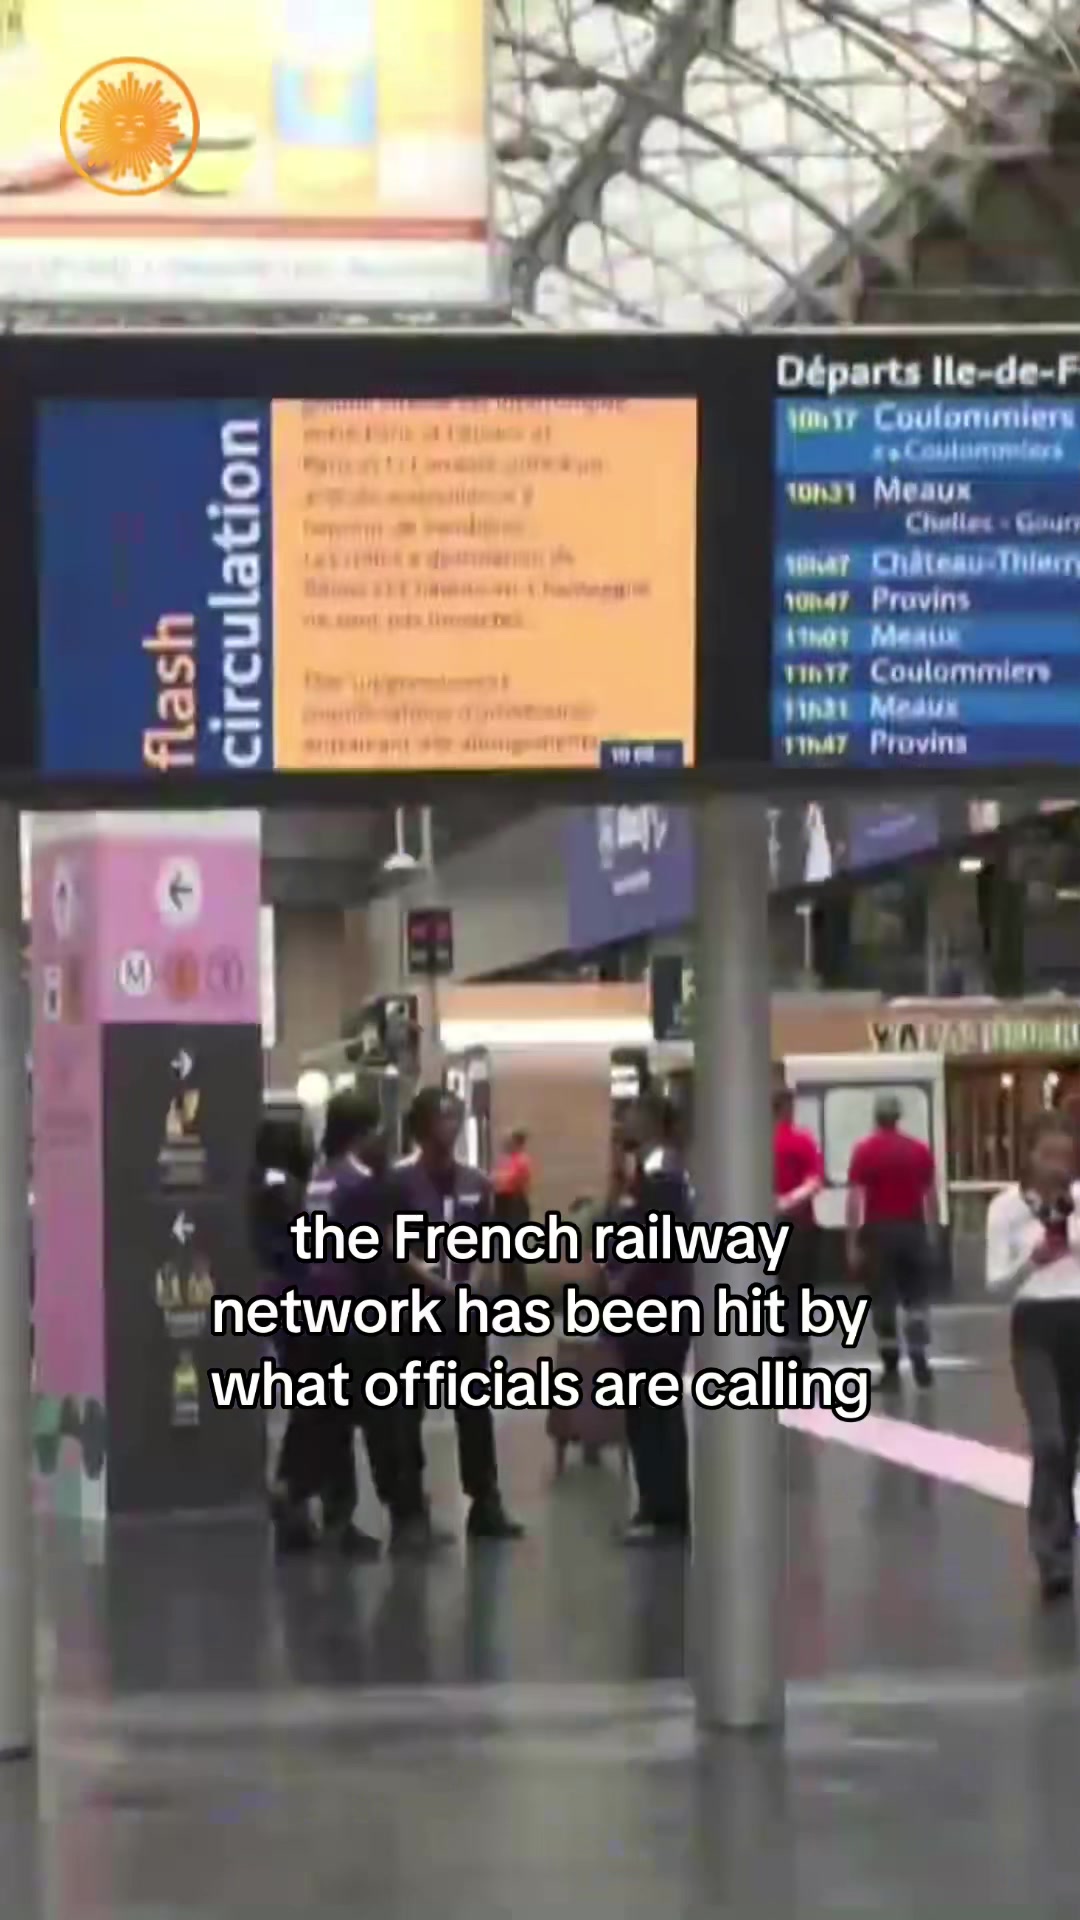 France's high-speed rail system was hit by several acts of "criminal" vandalism Friday, disrupting travel as thousands of people flock to Paris for the Opening Ceremony of the 2024 Summer Olympics. #olympics #parisolympics #paris2024 #olympicgames